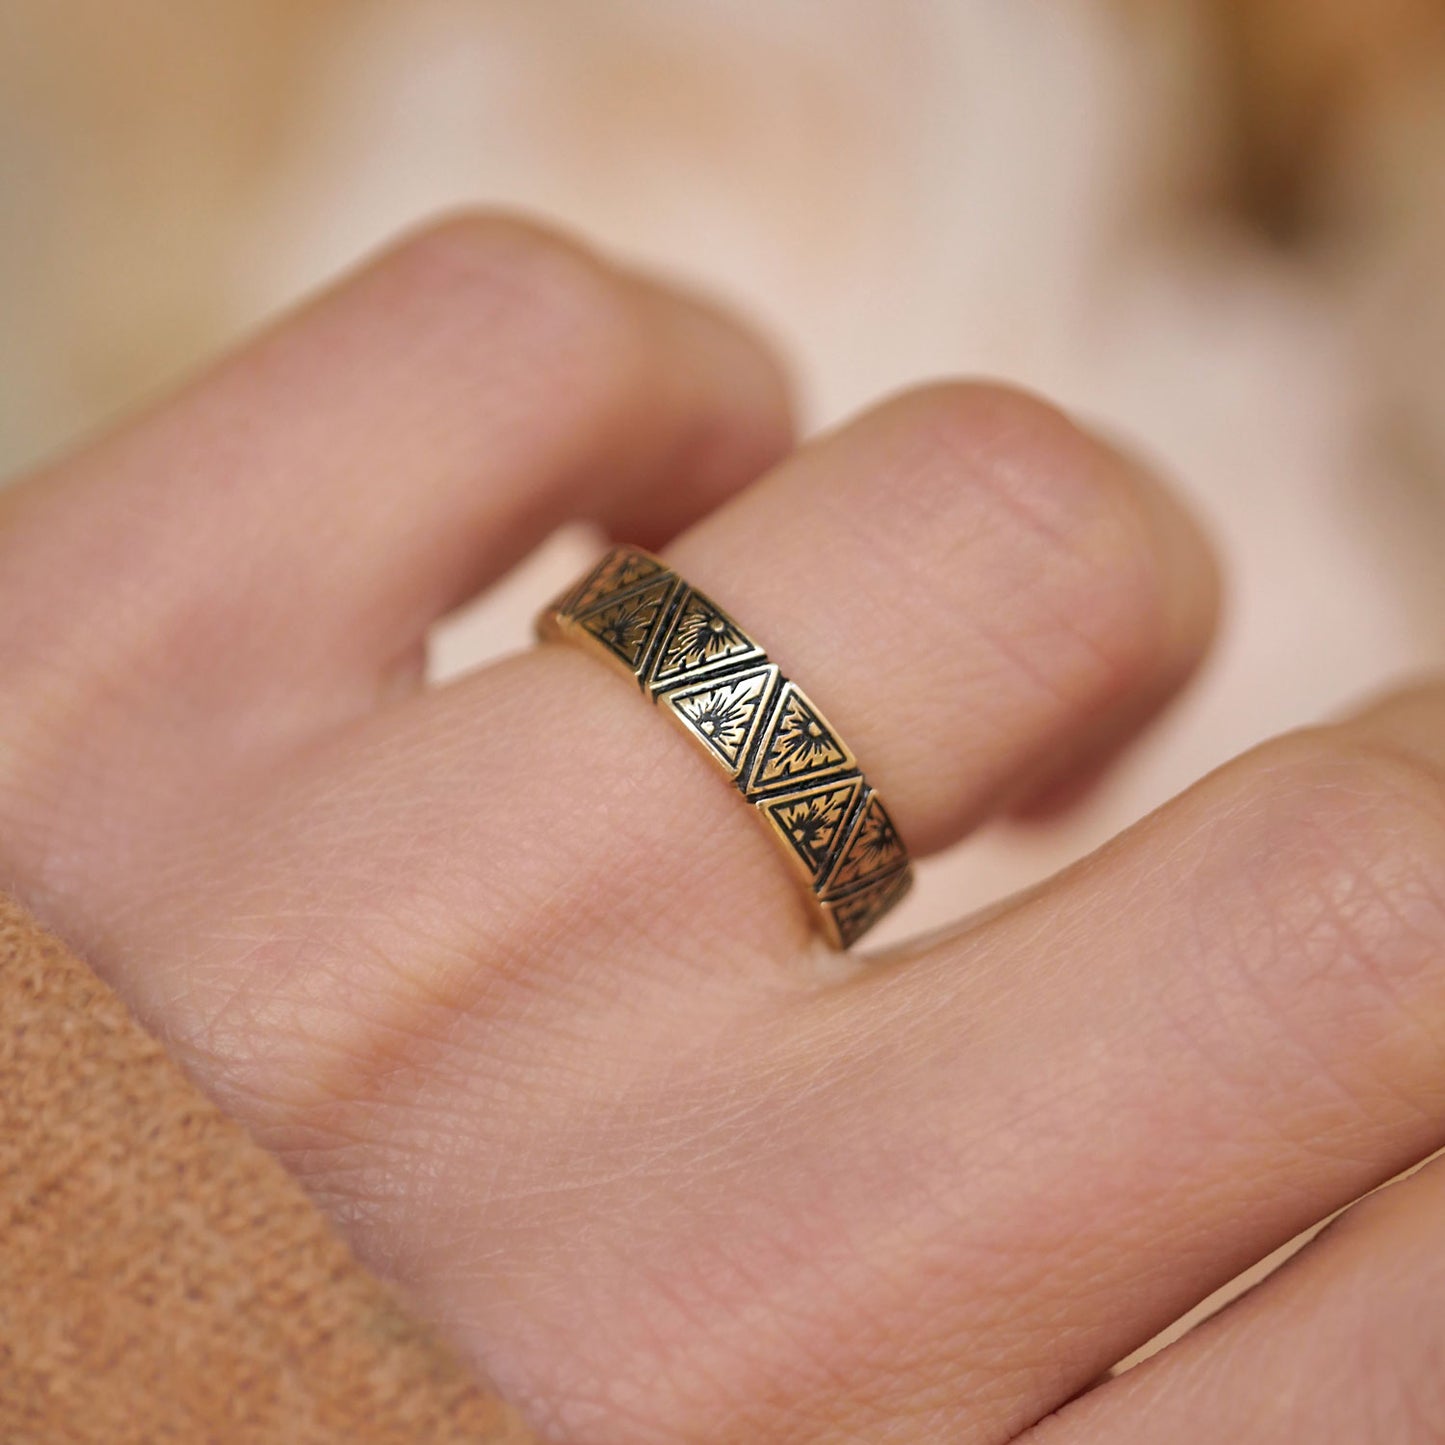 5mm Art Deco Engraved Triangle Ring